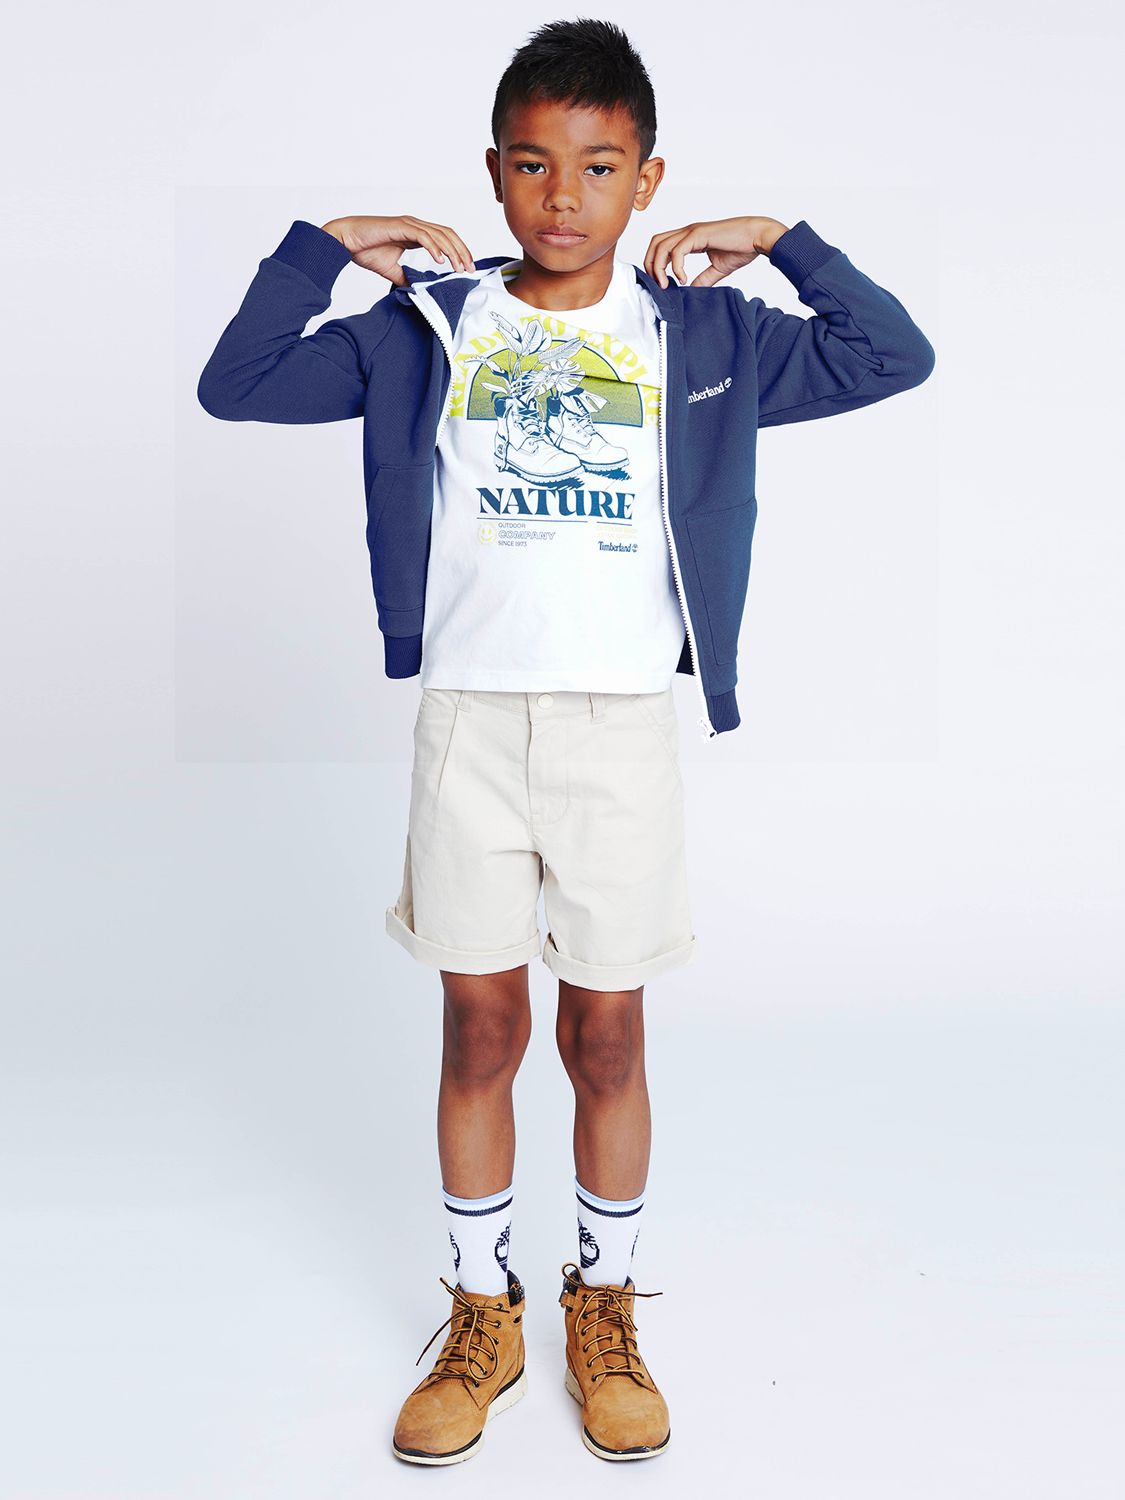 Buy Timberland Kids' Ready to Explore Nature T-Shirt, White Online at johnlewis.com